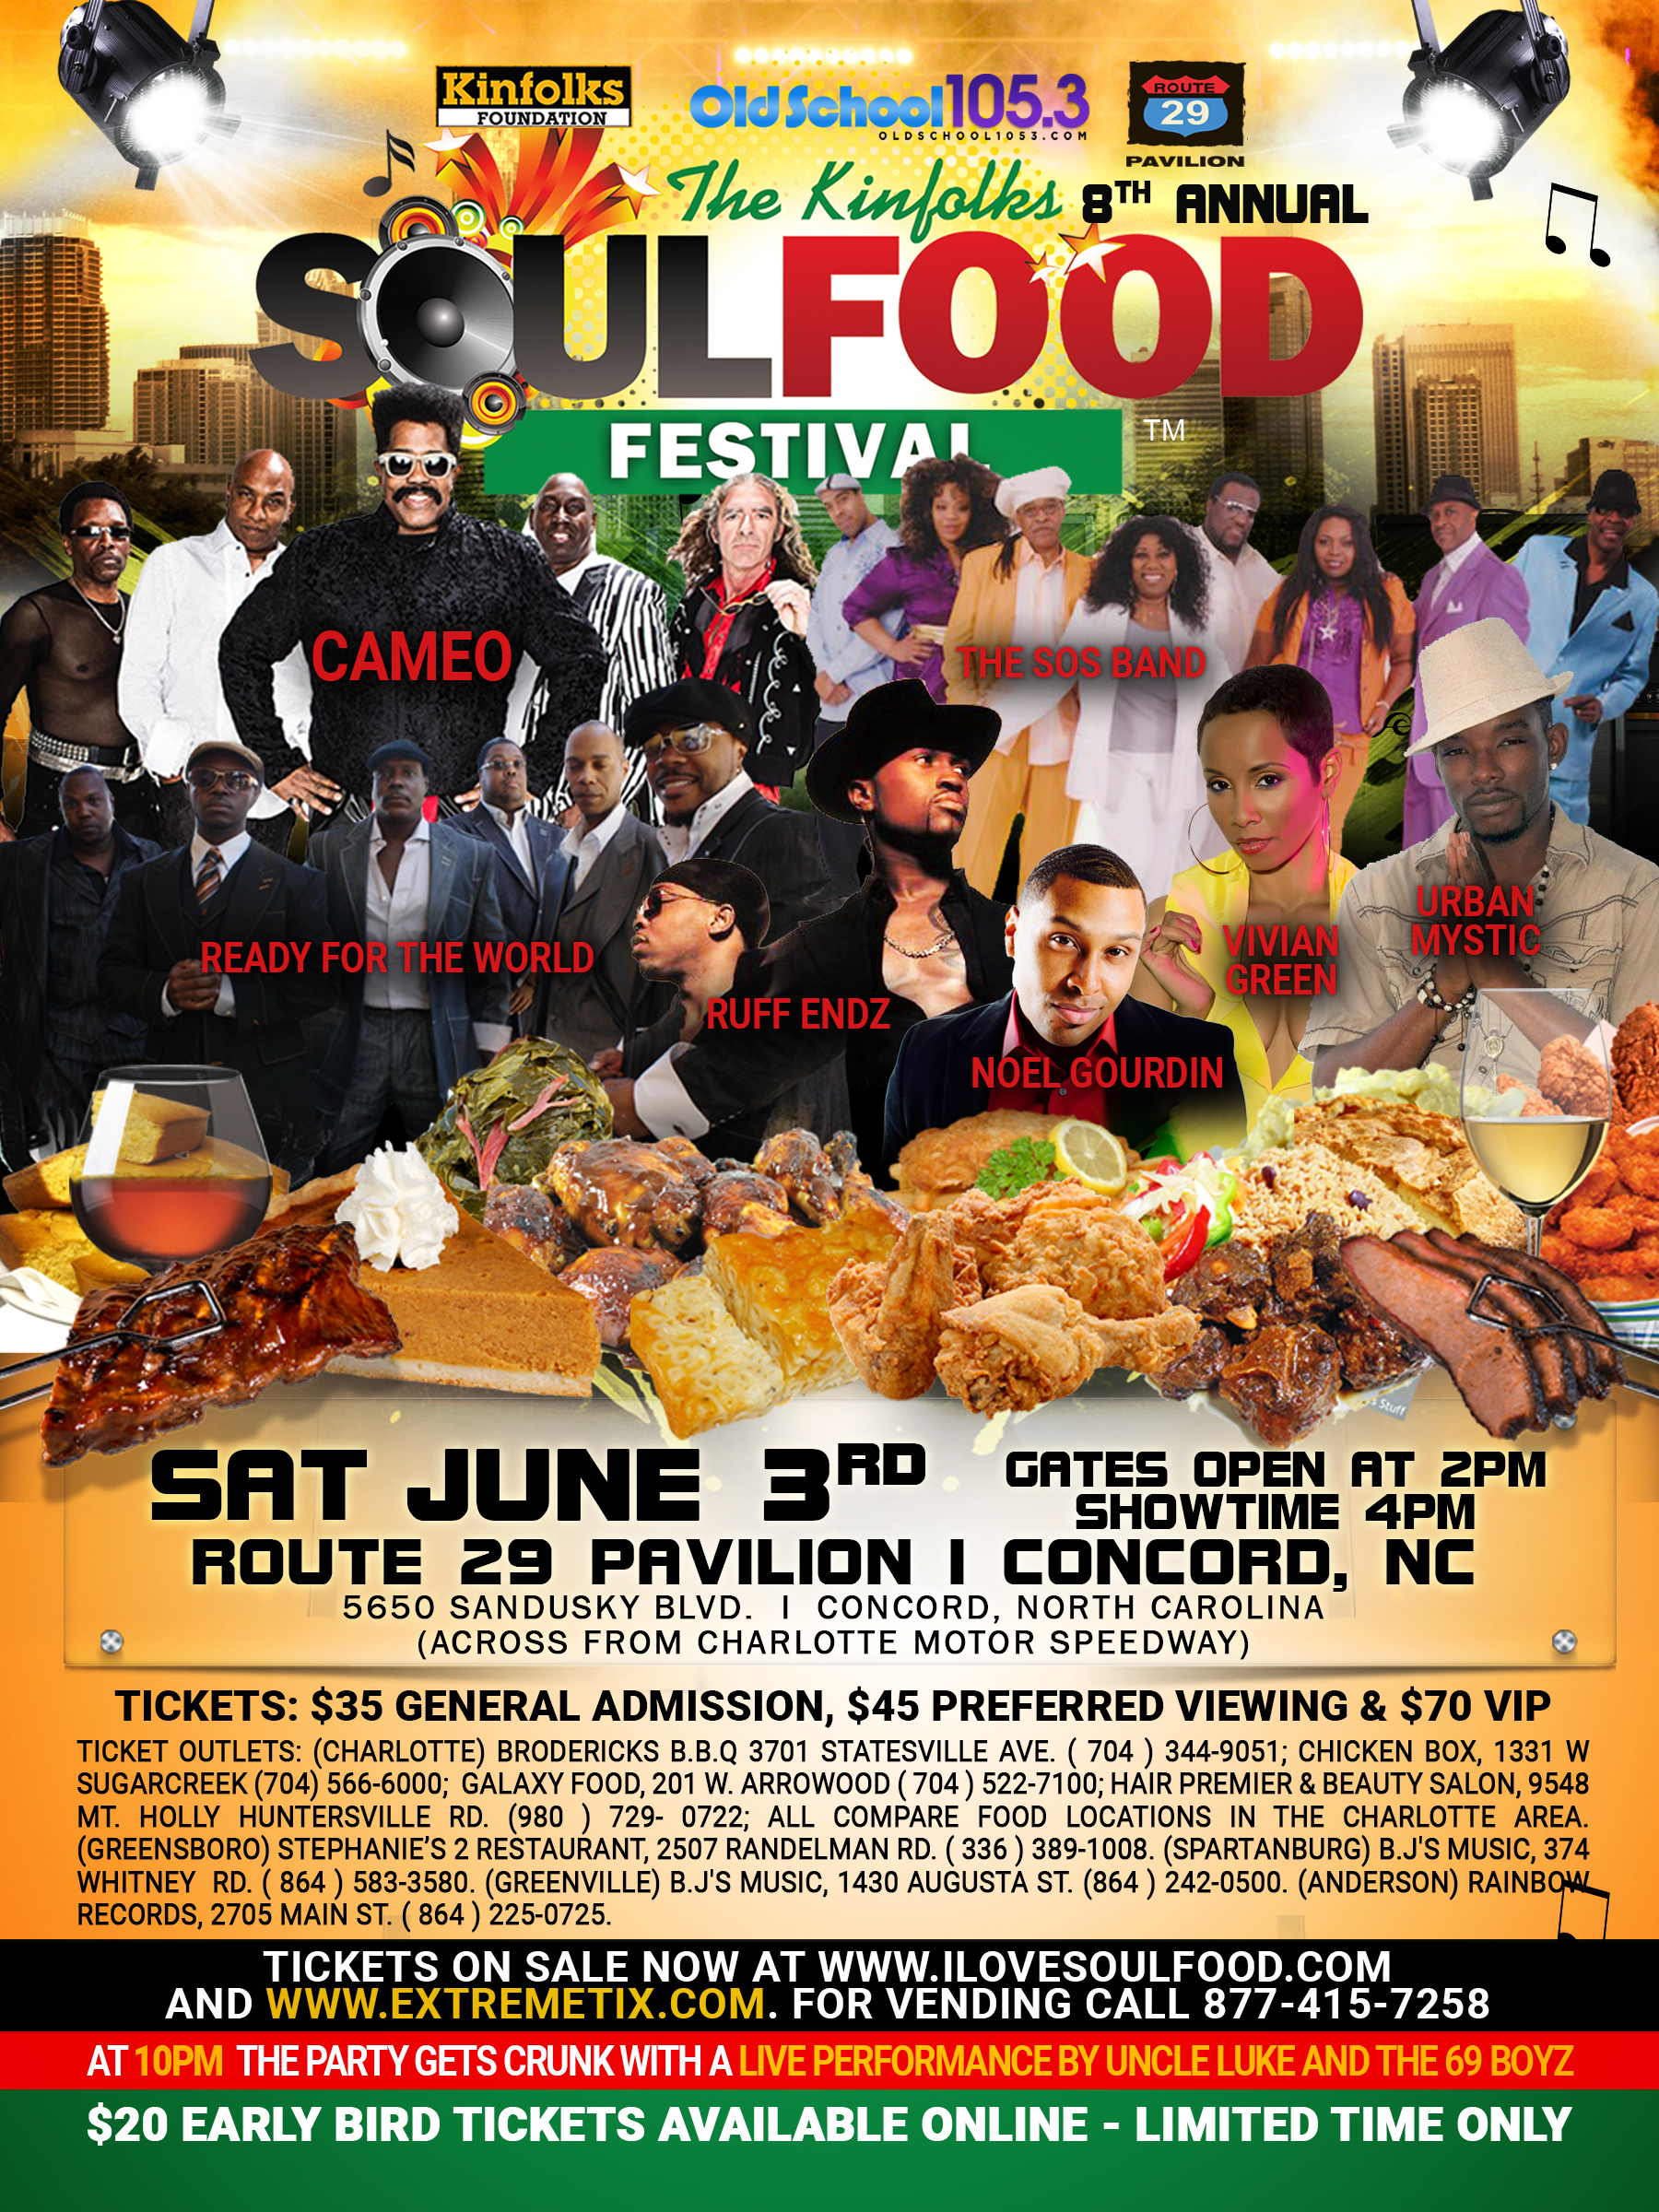 Details You Need To Know About The Soul Food Festival! 105.3 RnB